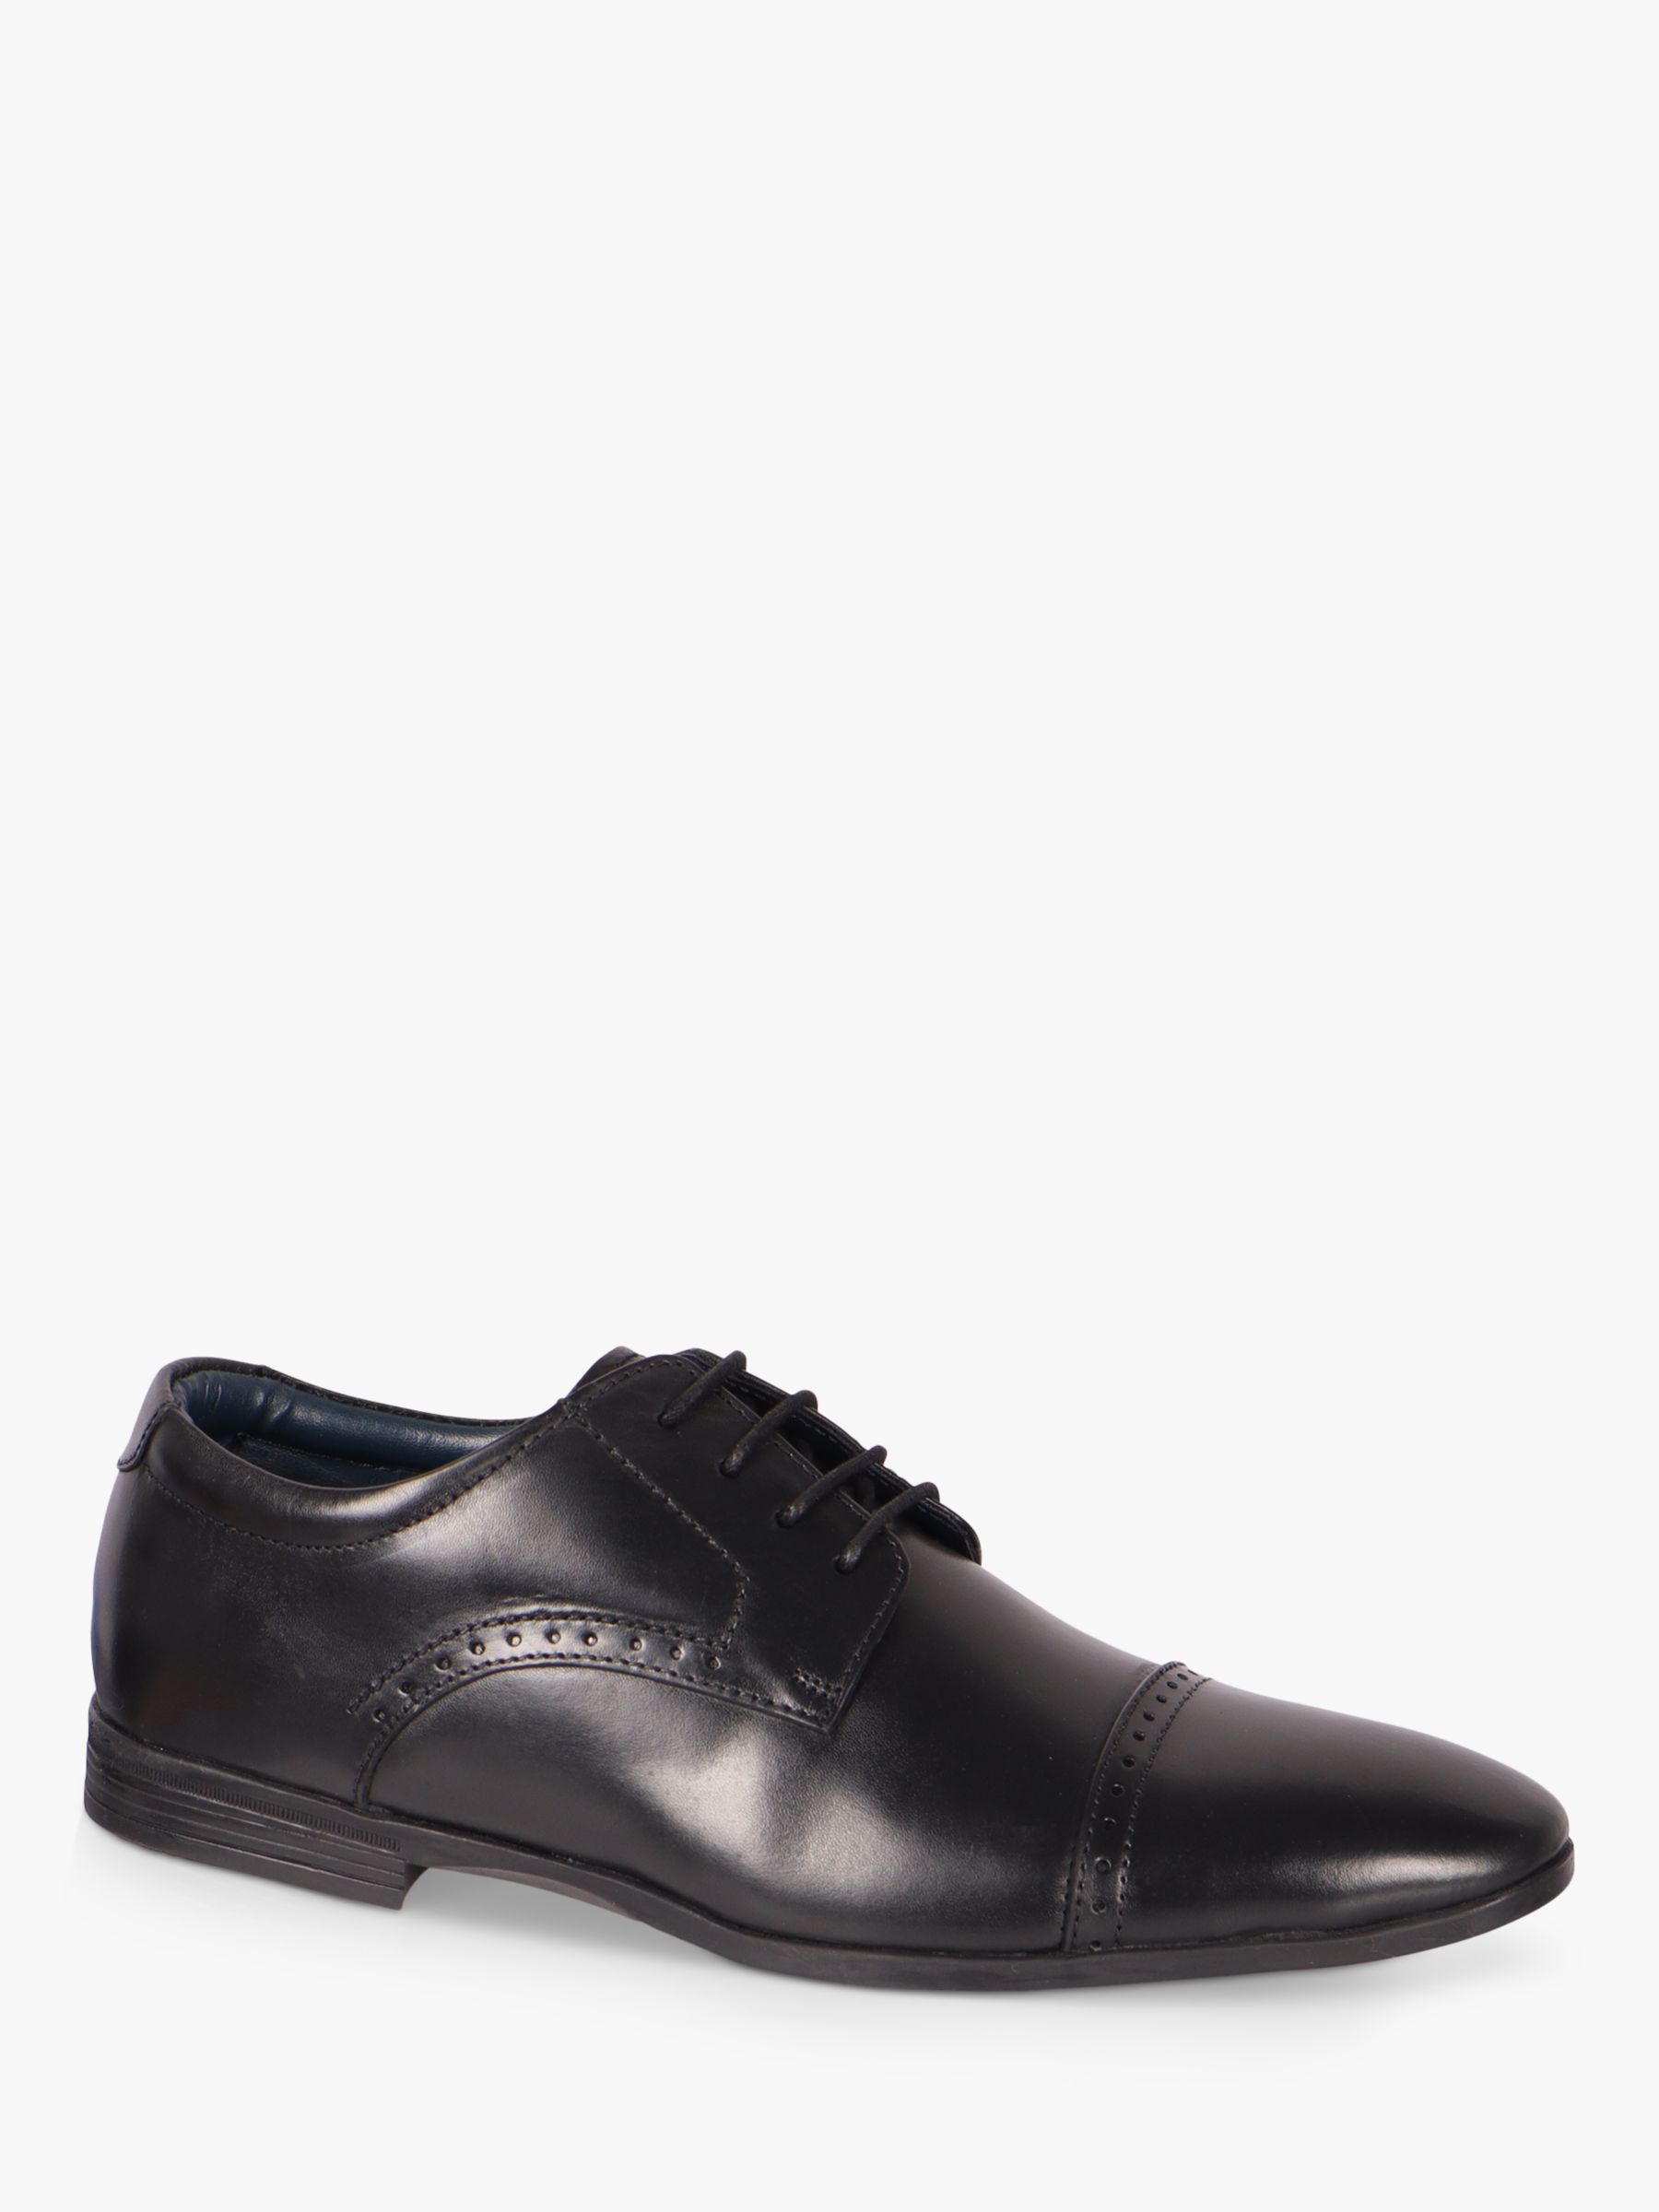 Buy Silver Street London Lawrence Leather Brogues, Black Online at johnlewis.com